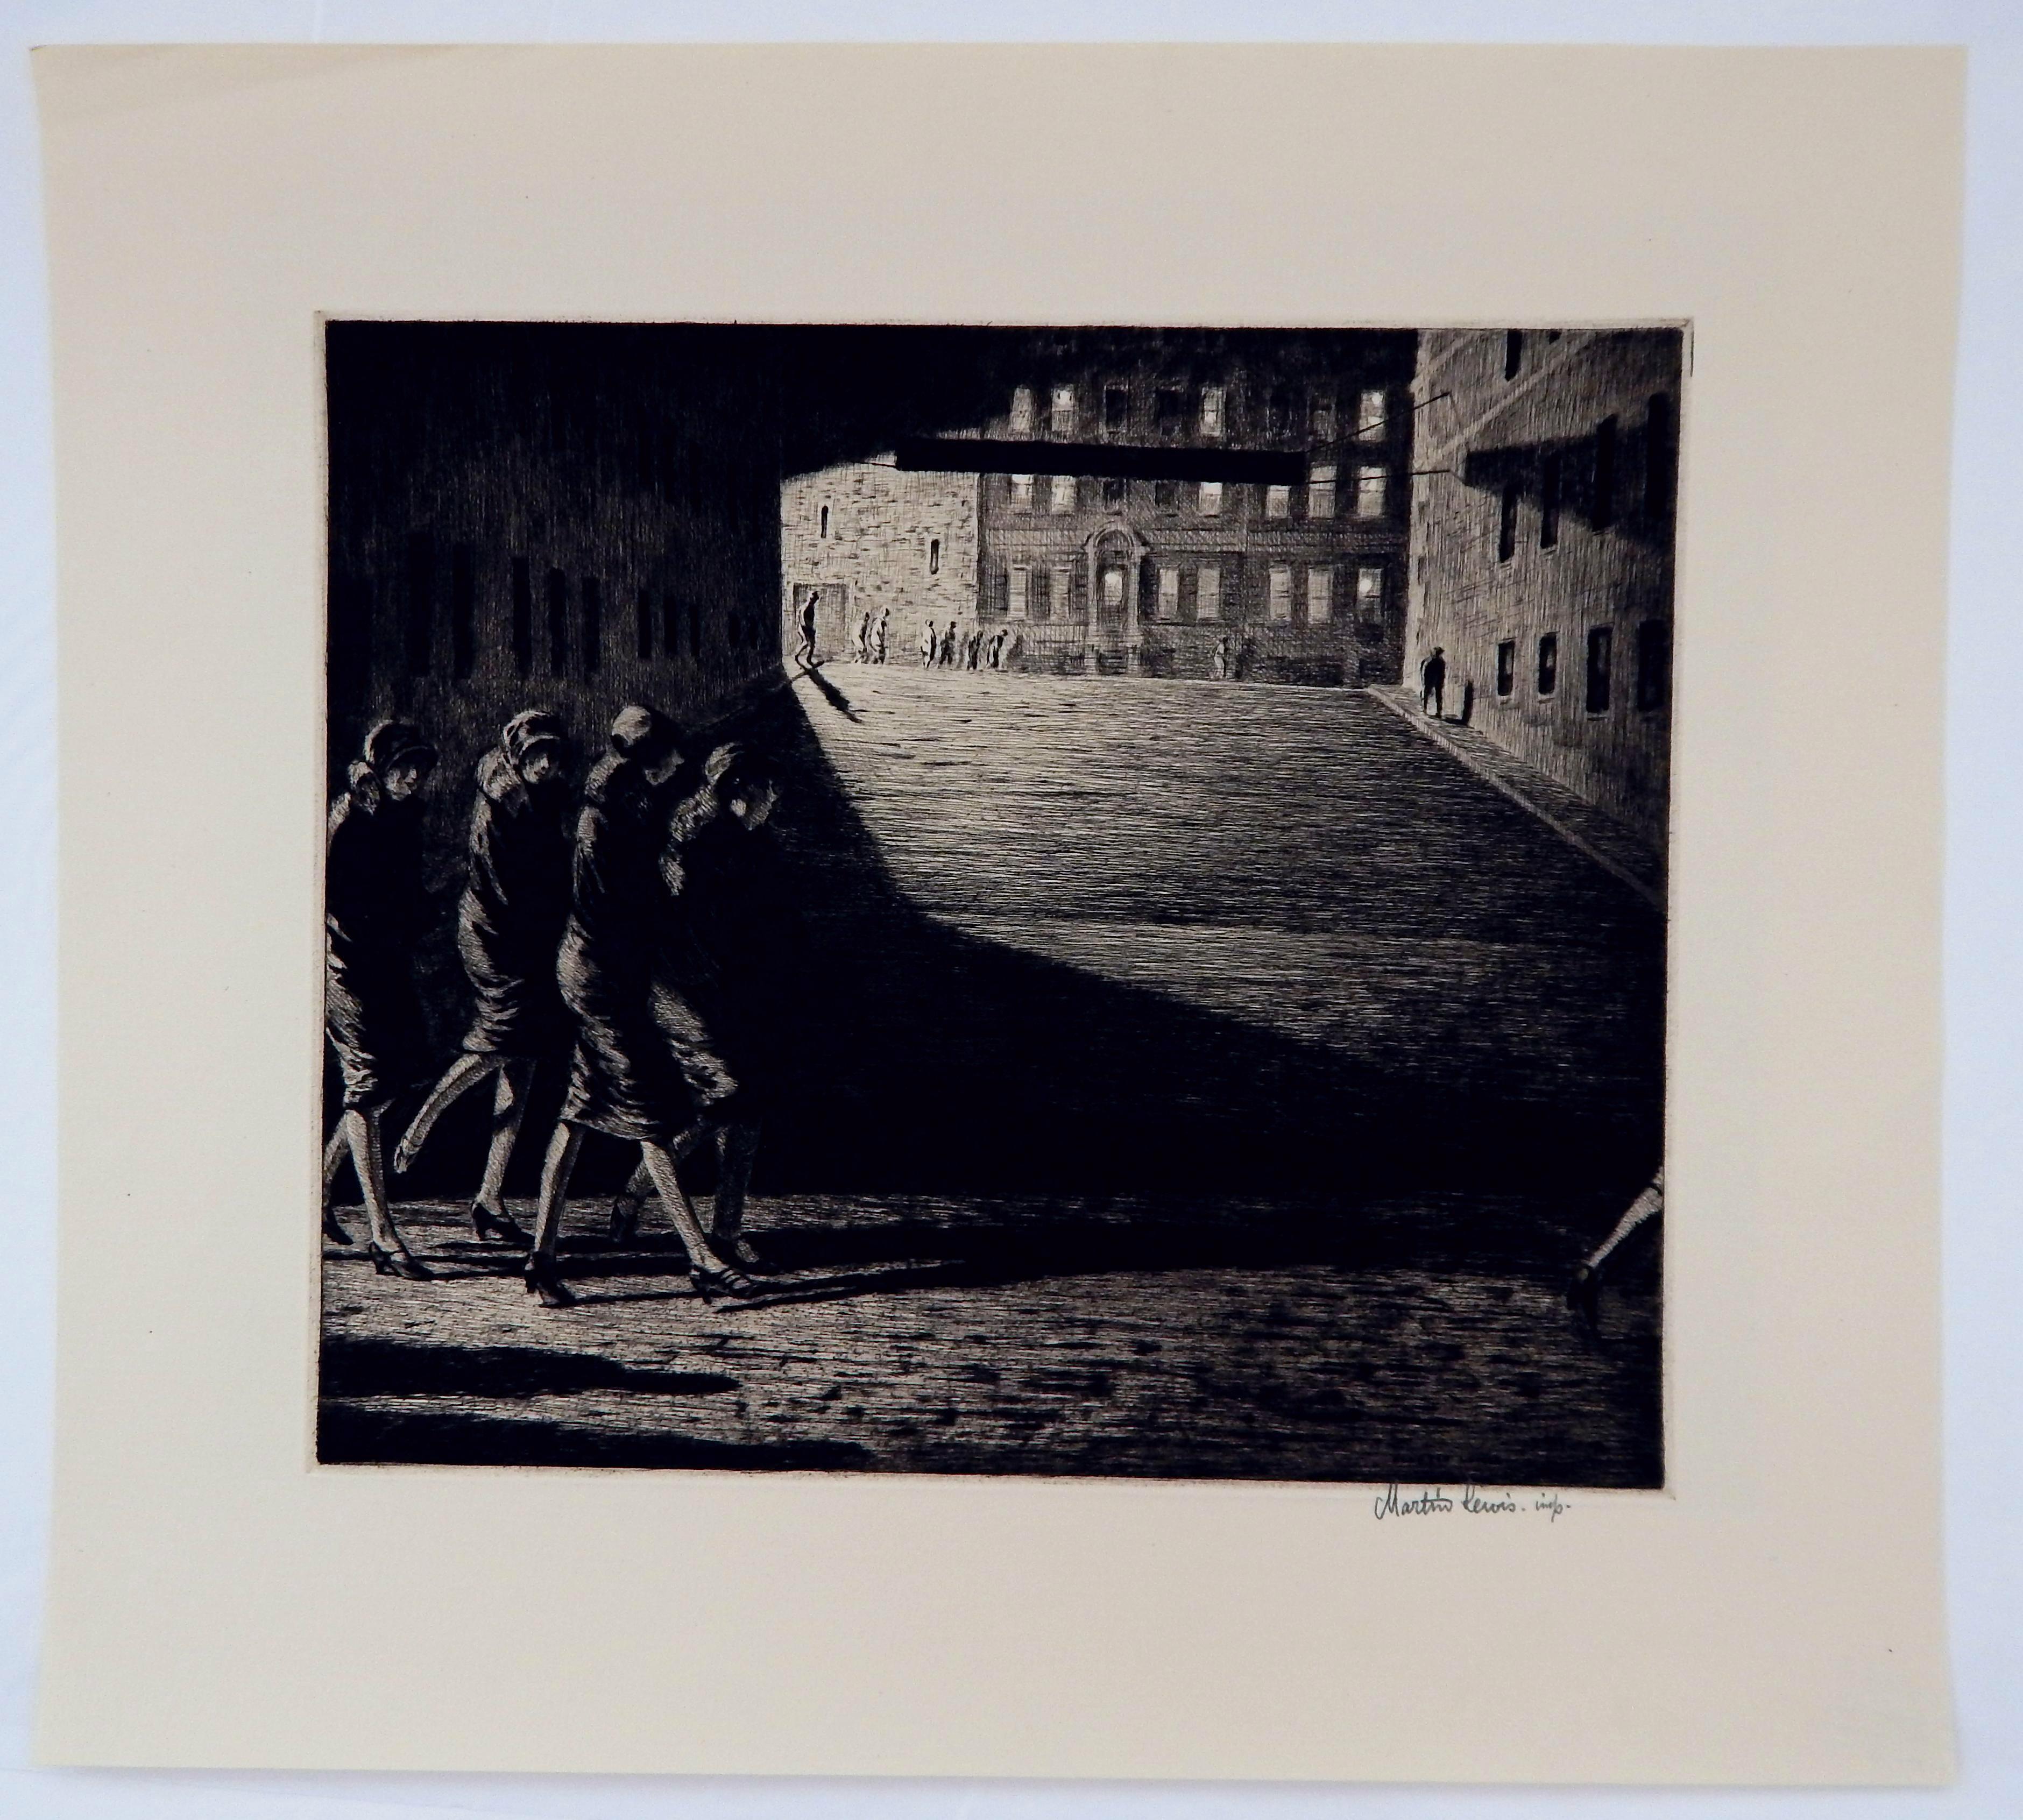 Original etching with drypoint in mint condition by well-known New York 
artist and printmaker Martin Lewis (1881-1962).
The print is signed in pencil lower right. The title is: “Shadows on the Ramp”
Image measures: 9